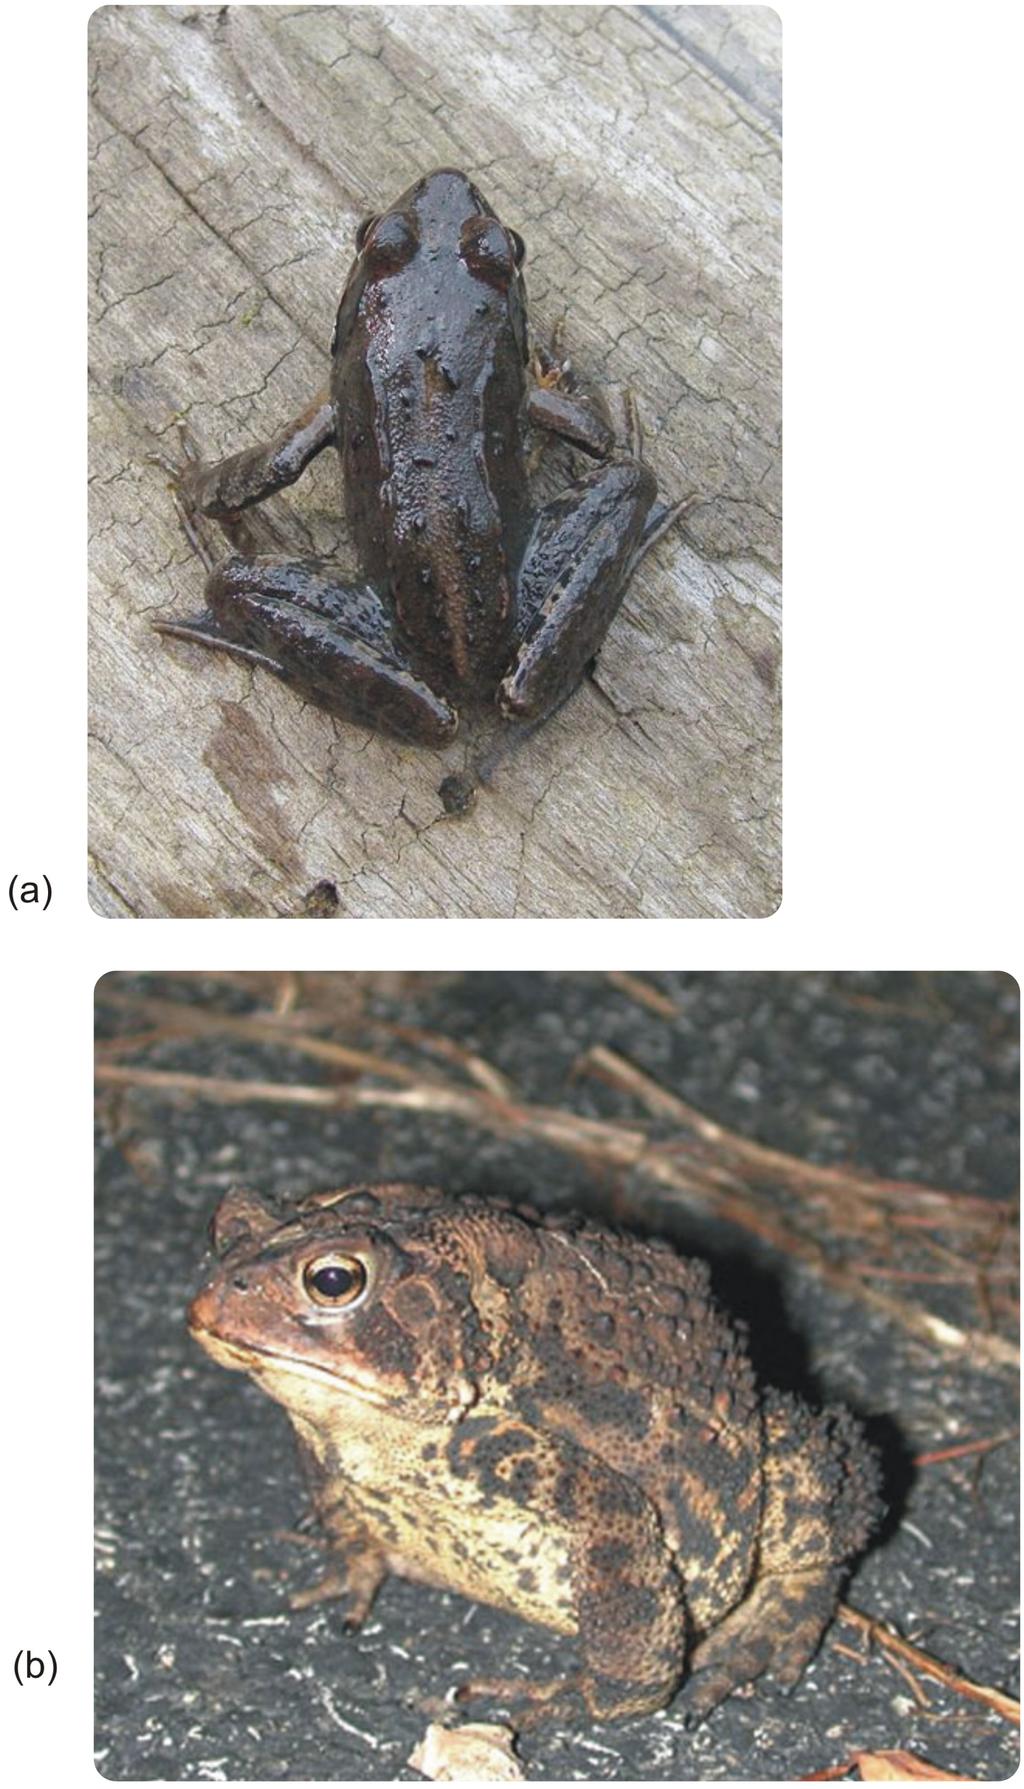 Frog and Toad: Frogs (a) and toads (b) are placed in the same amphibian order. What traits do they share?